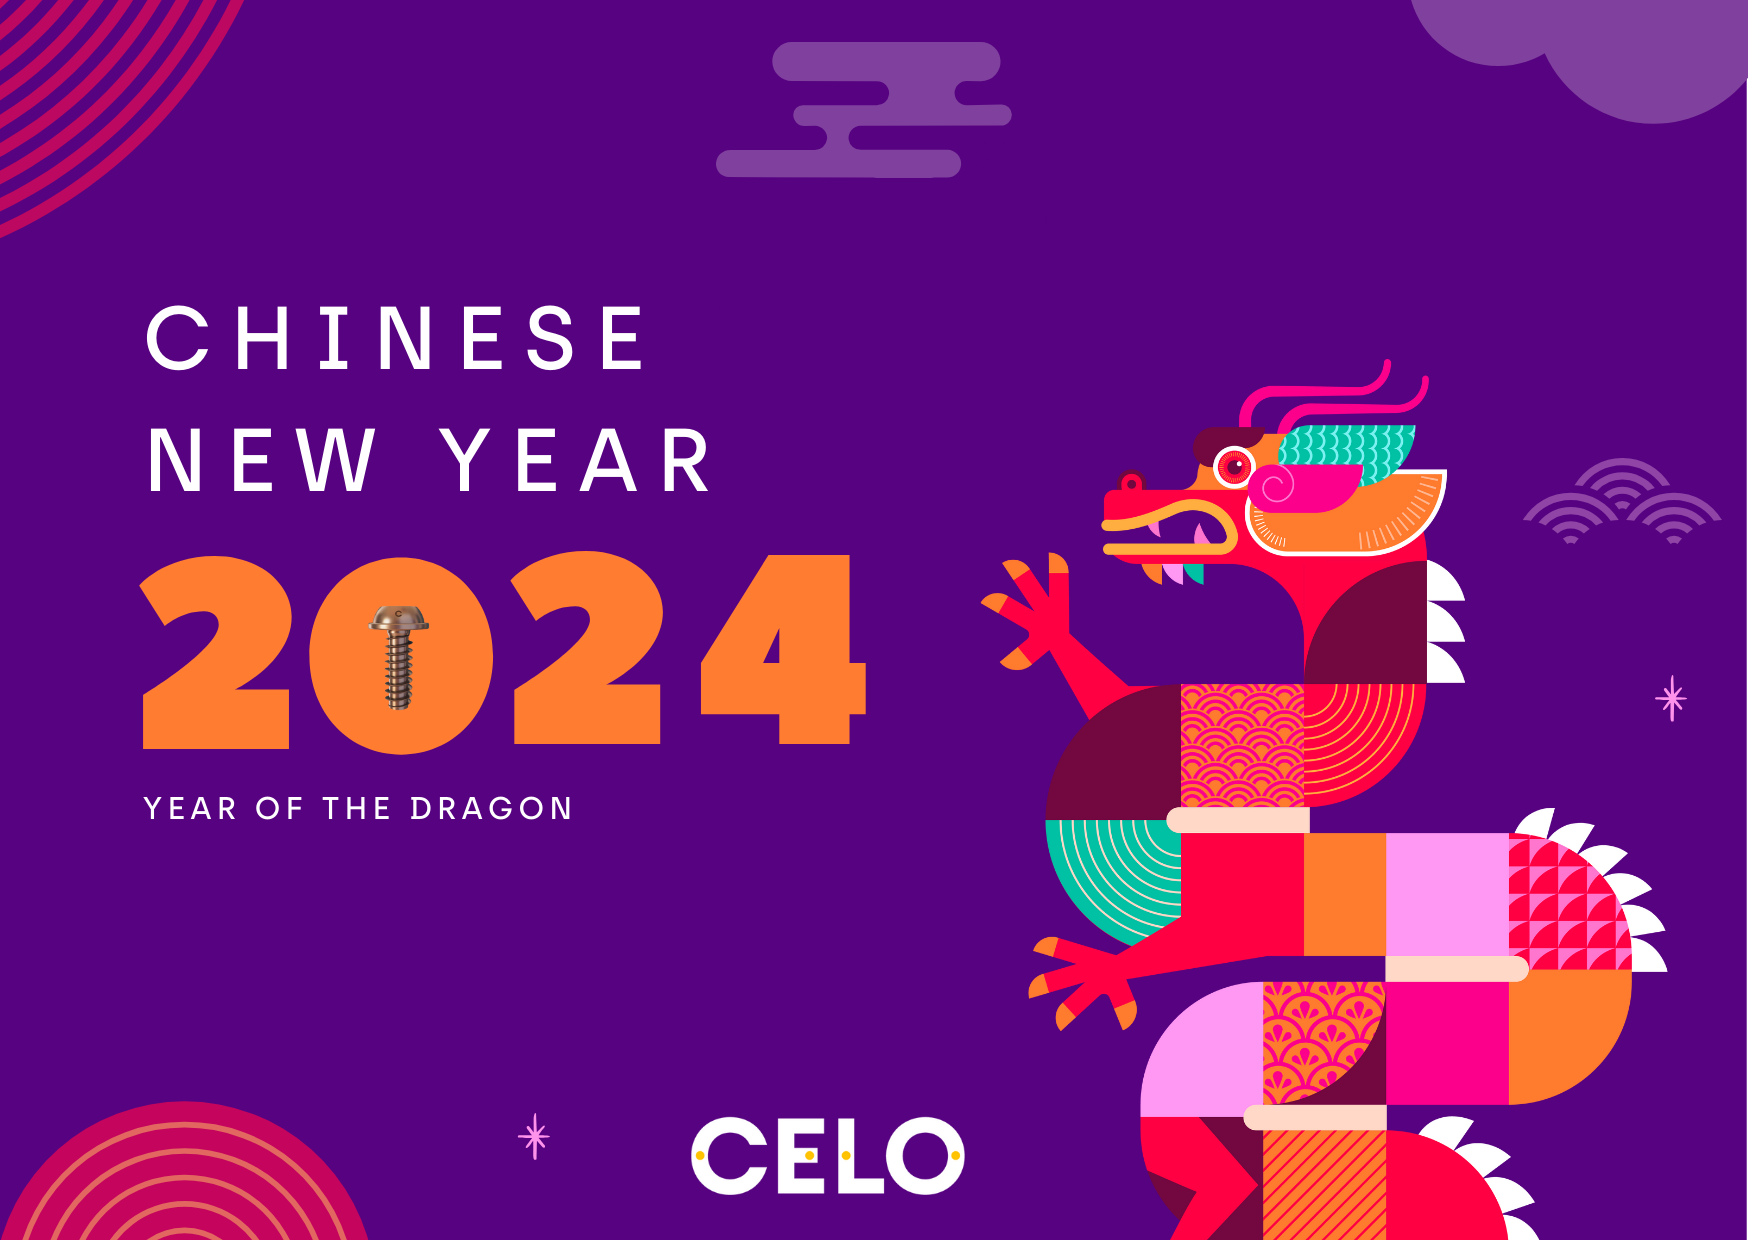 Nouvel An chinois 2024